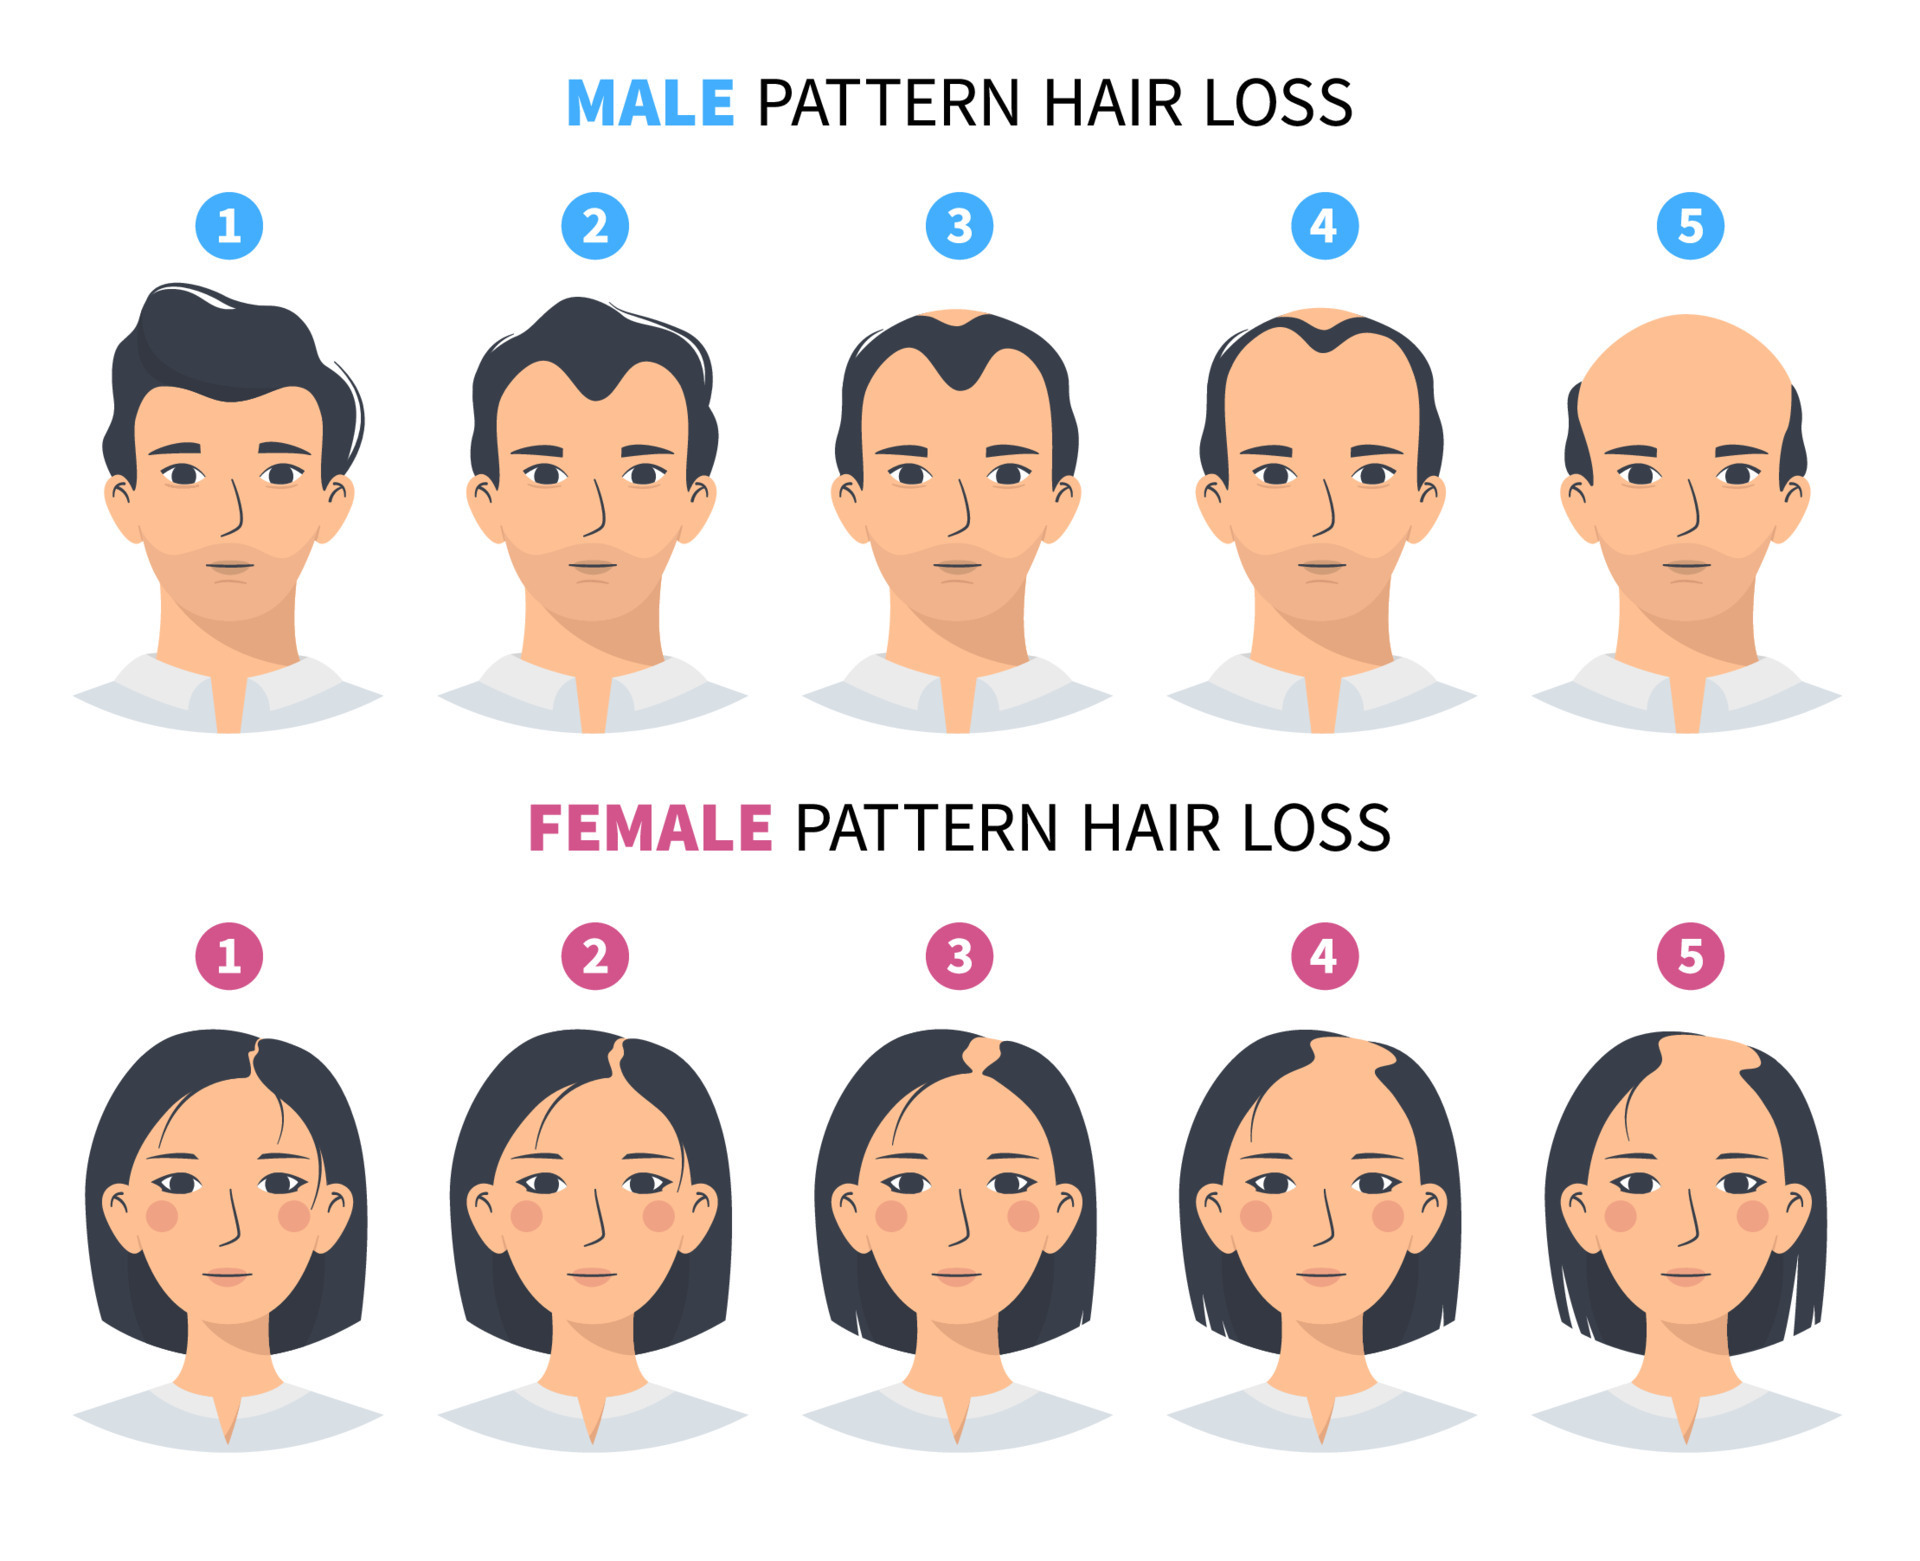 FemalePattern Baldness Causes Treatments and More  GoodRx